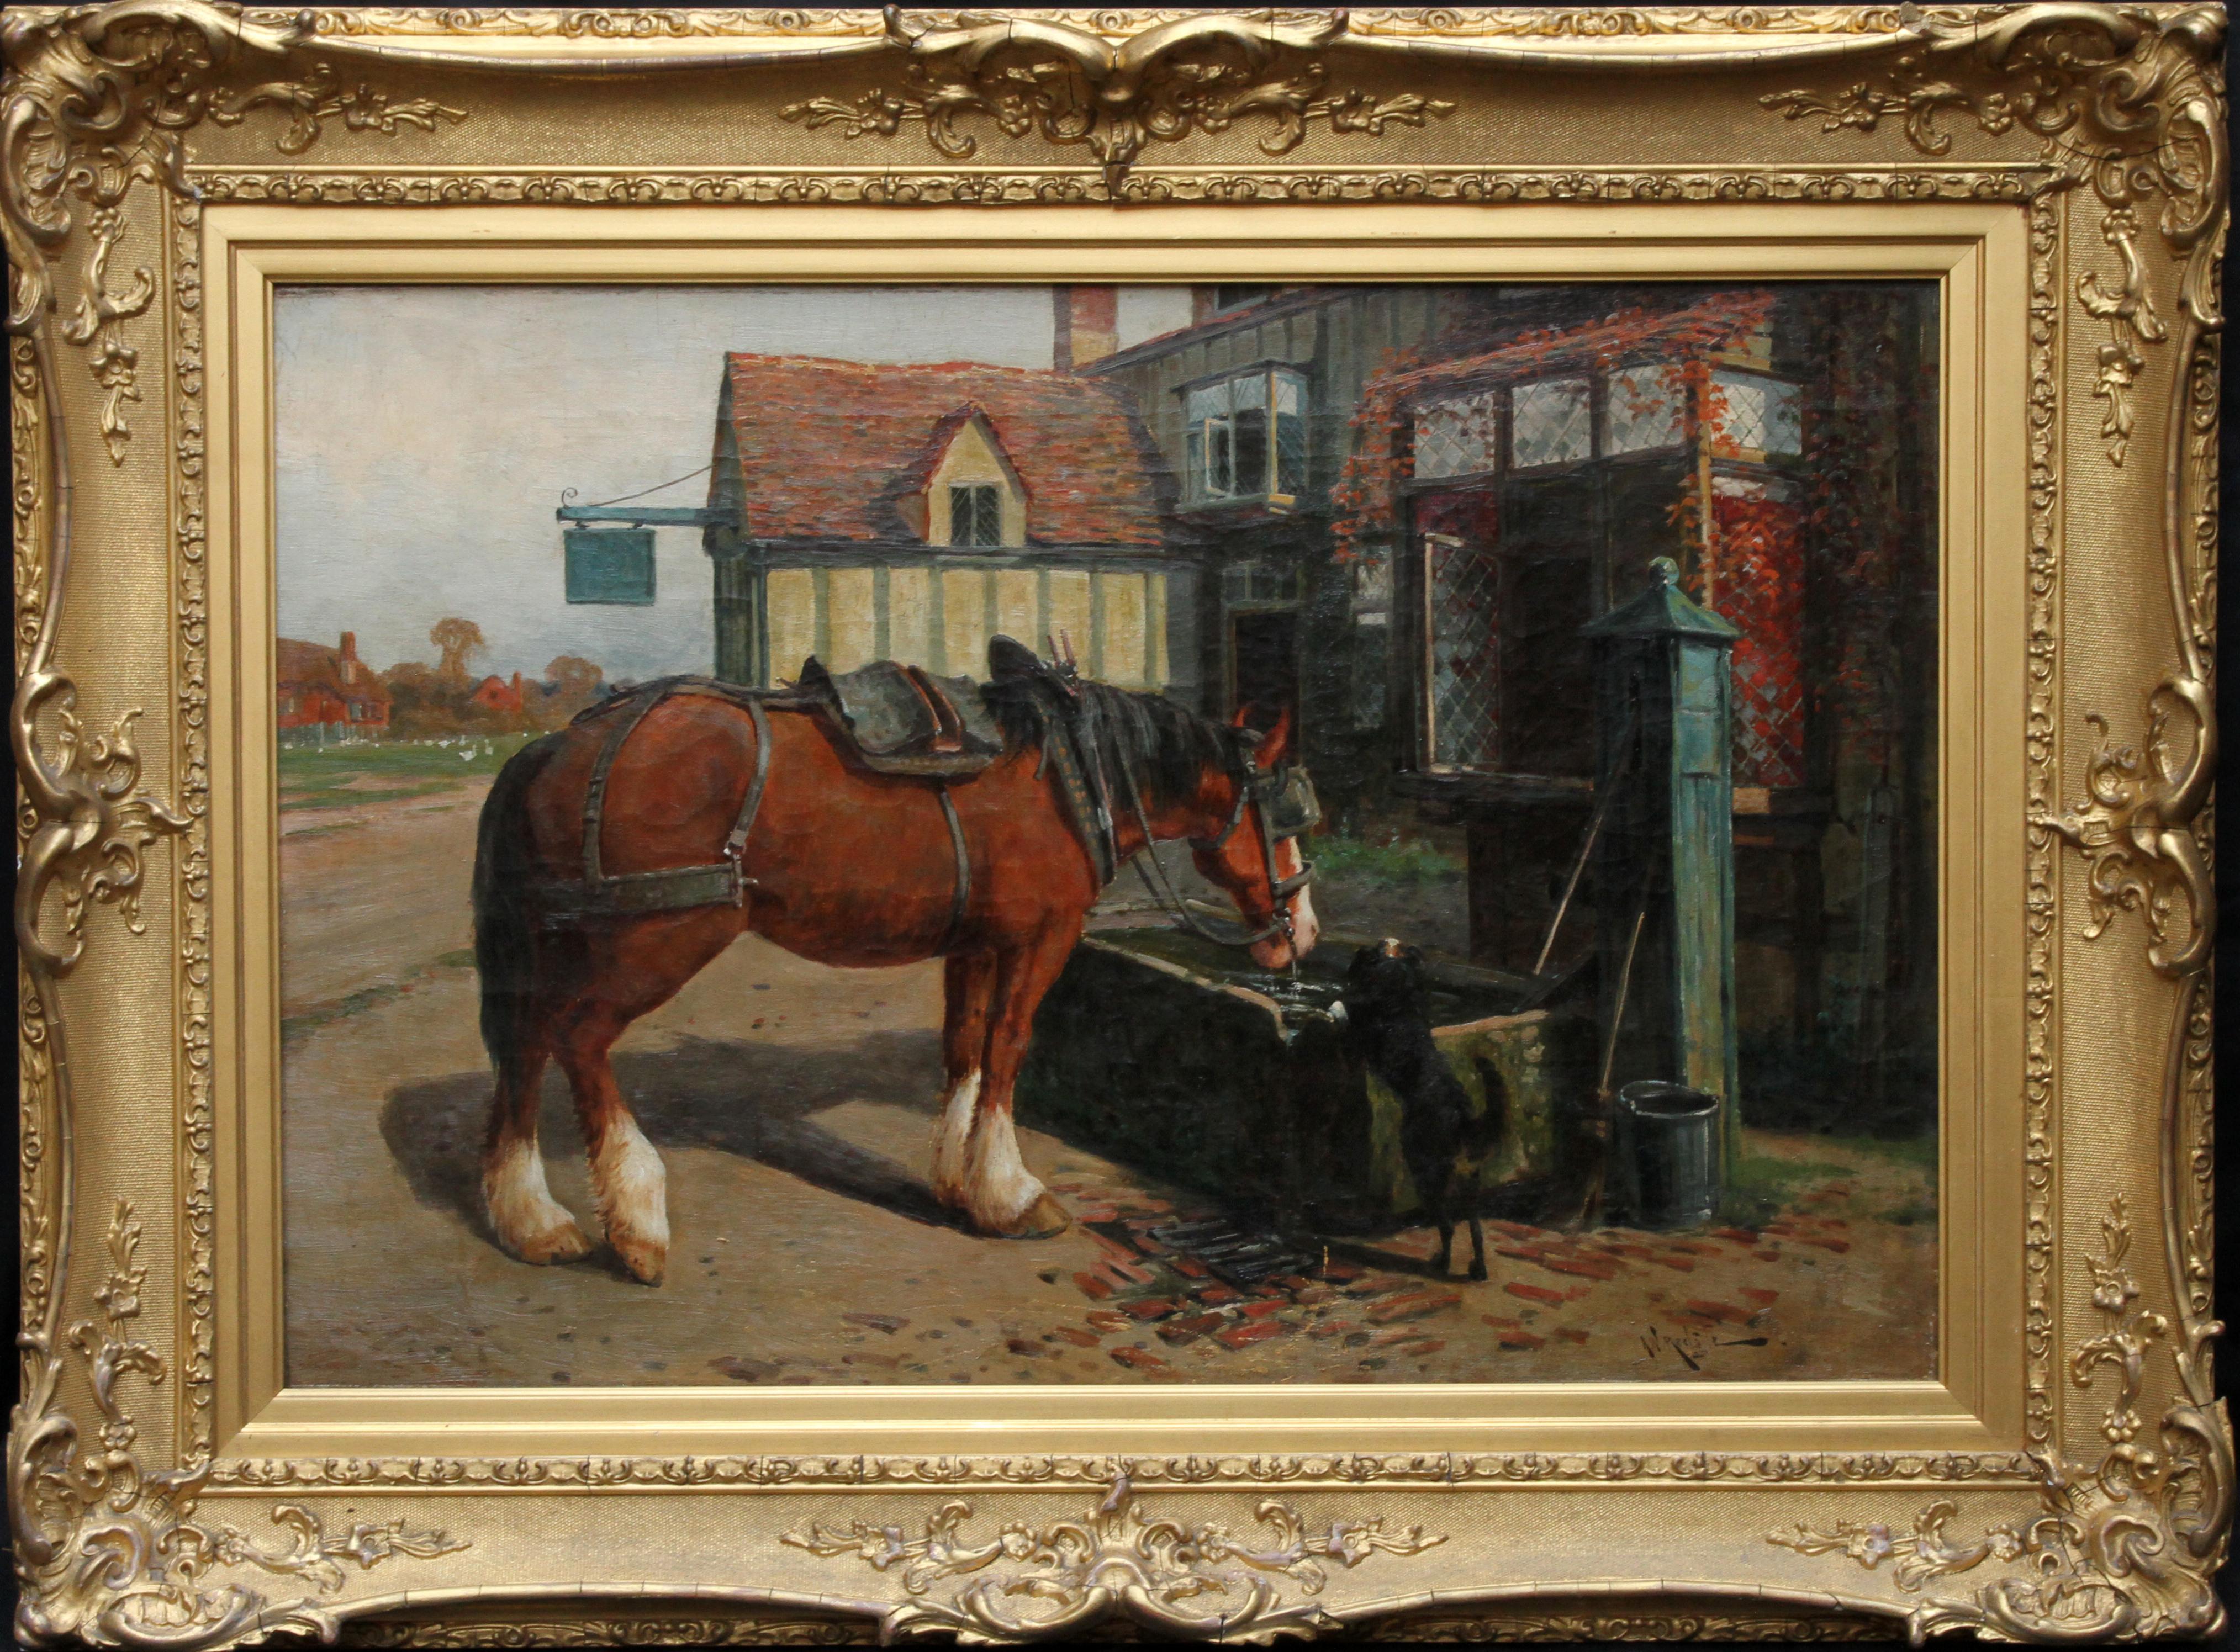 Arthur William Redgate Animal Painting - Farm Horse at Trough before a Tavern - British Victorian animal art oil painting